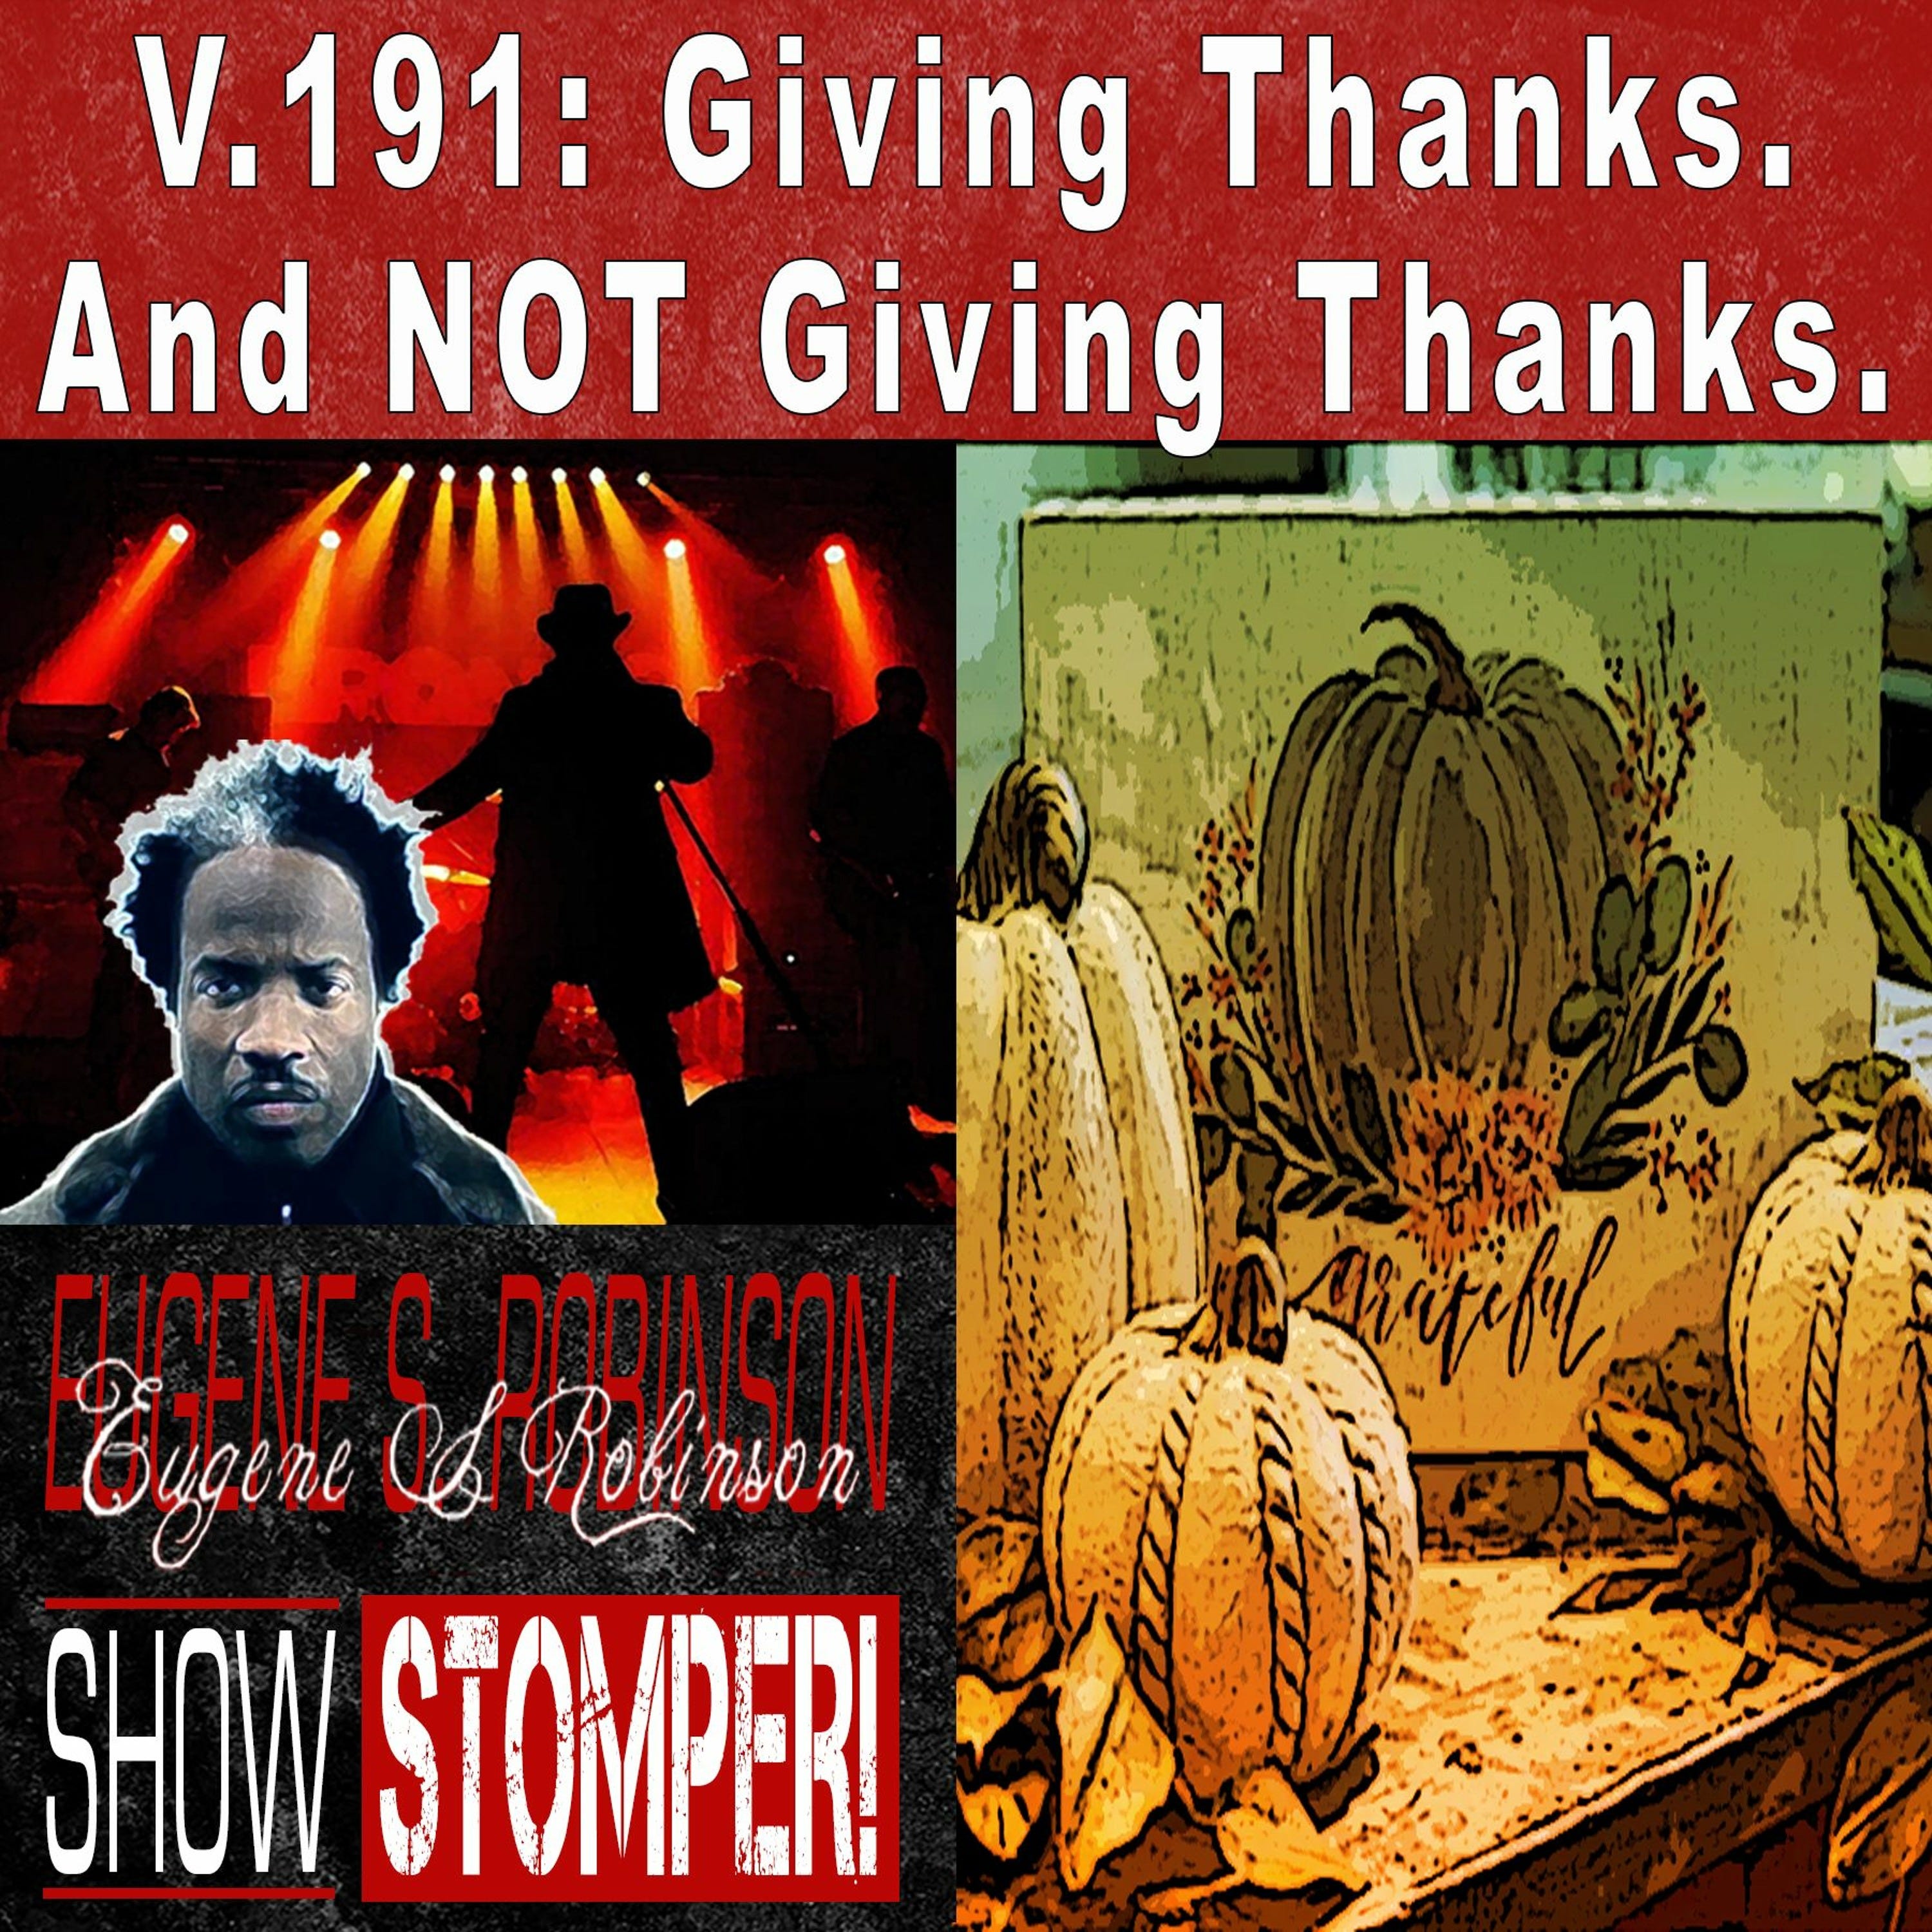 V.191 Giving Thanks. And NOT Giving Thanks. All On The Eugene S. Robinson Show Stomper!